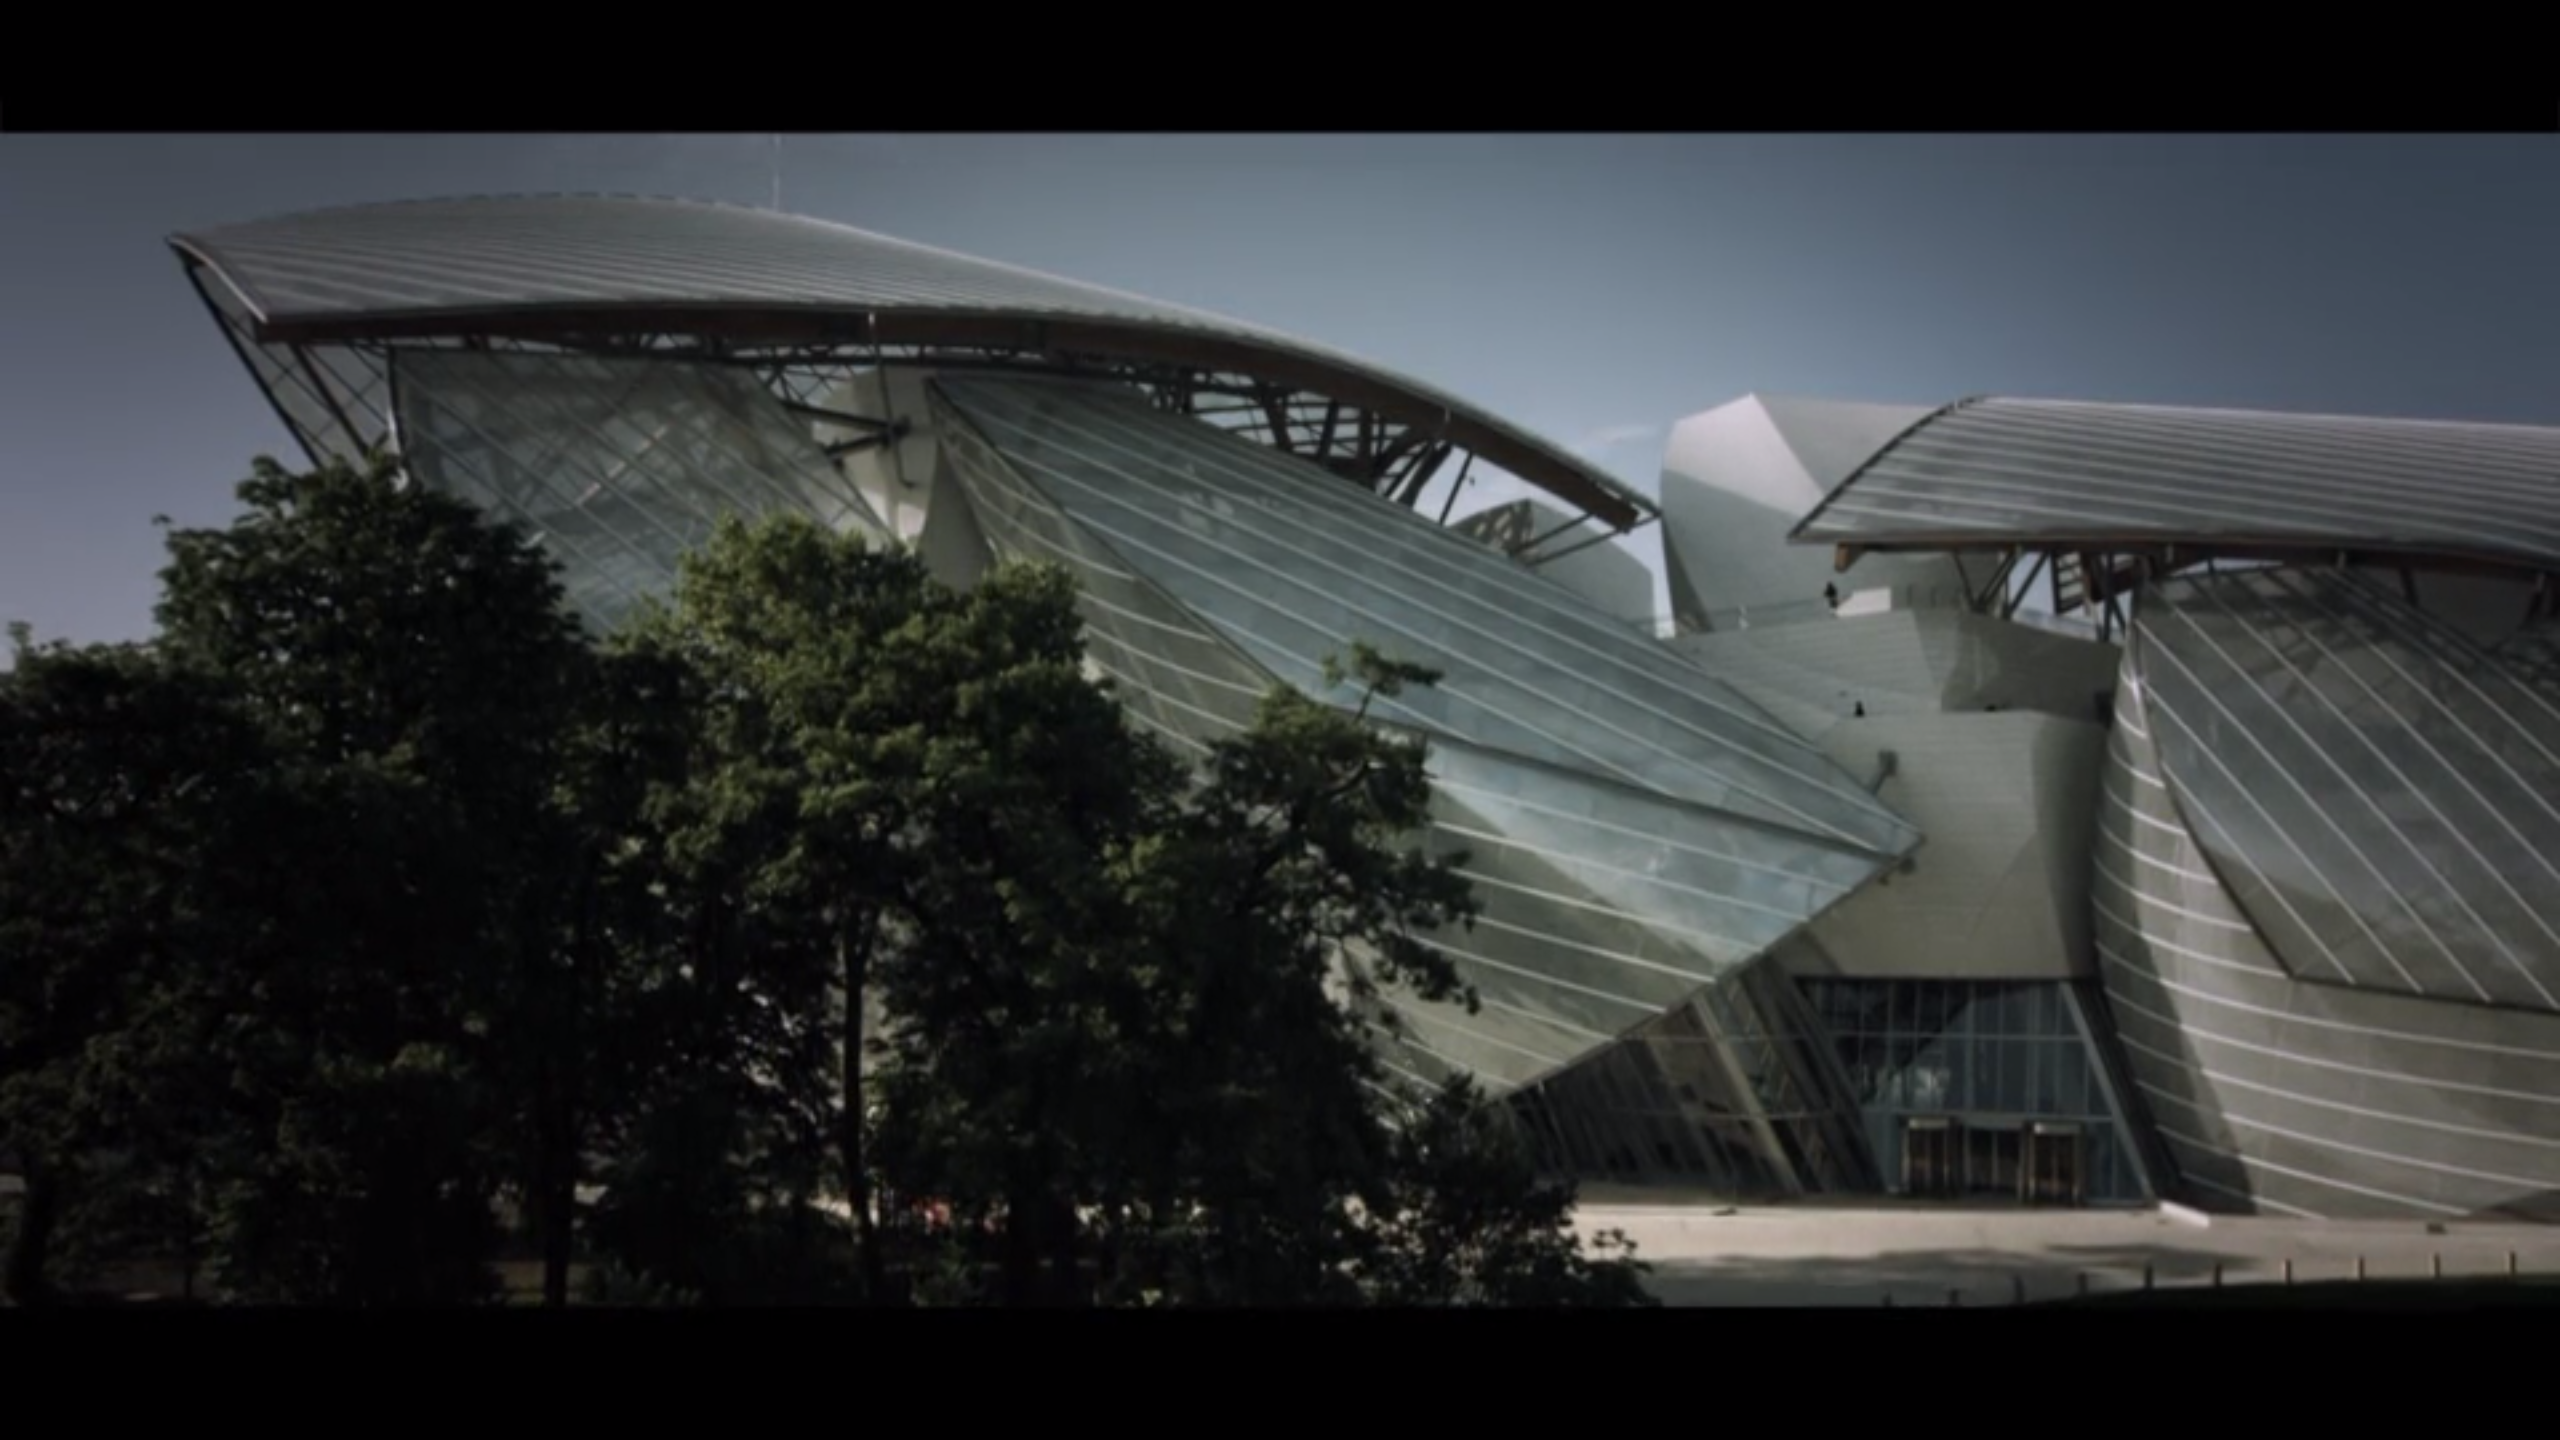 Frank Gehry creates a miniature Fondation Louis Vuitton in Seoul